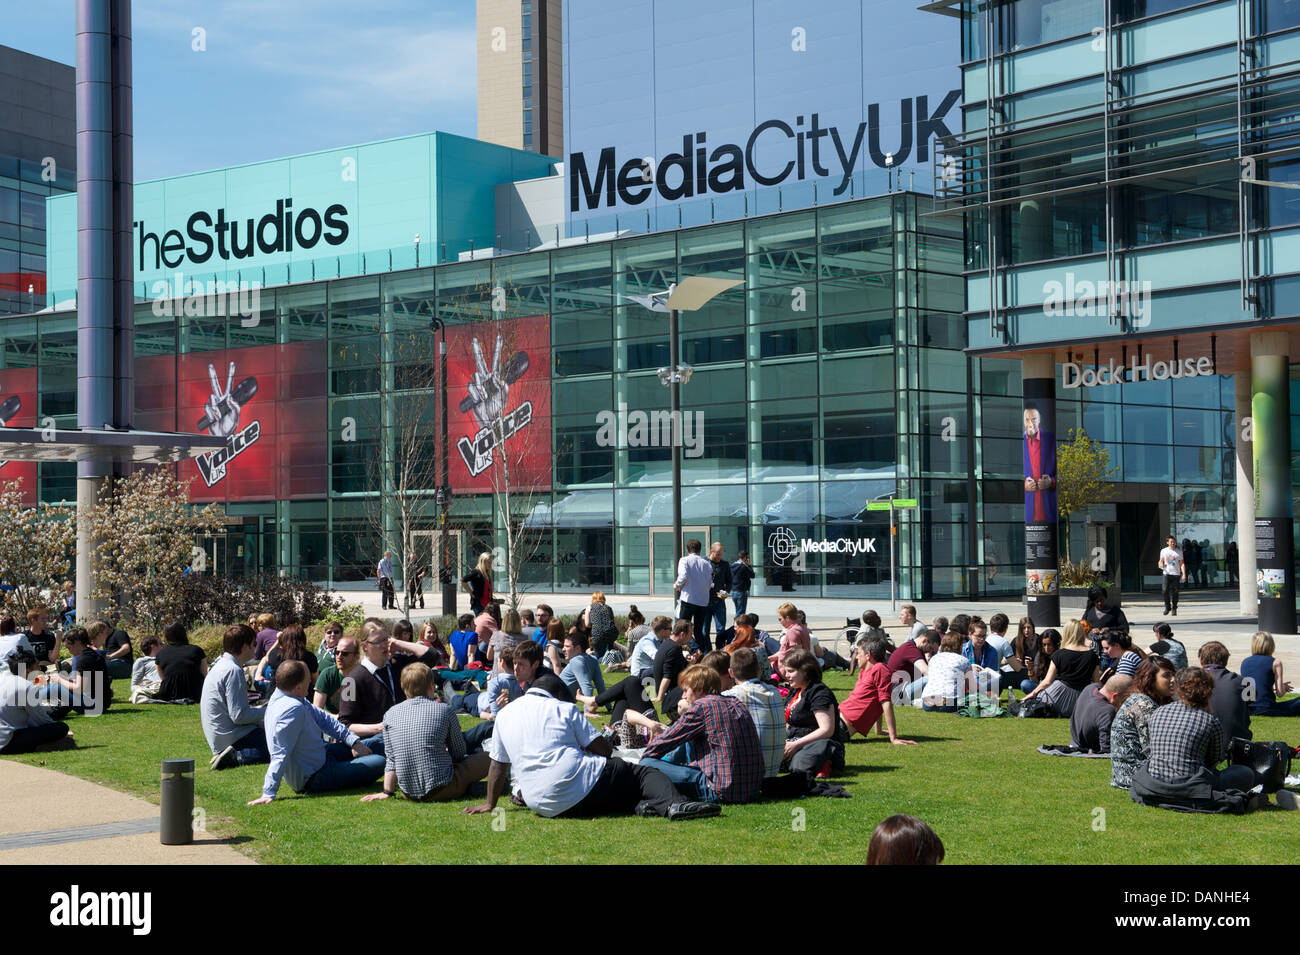 Media City in Salford, Manchester bathed in sunshine Stock Photo